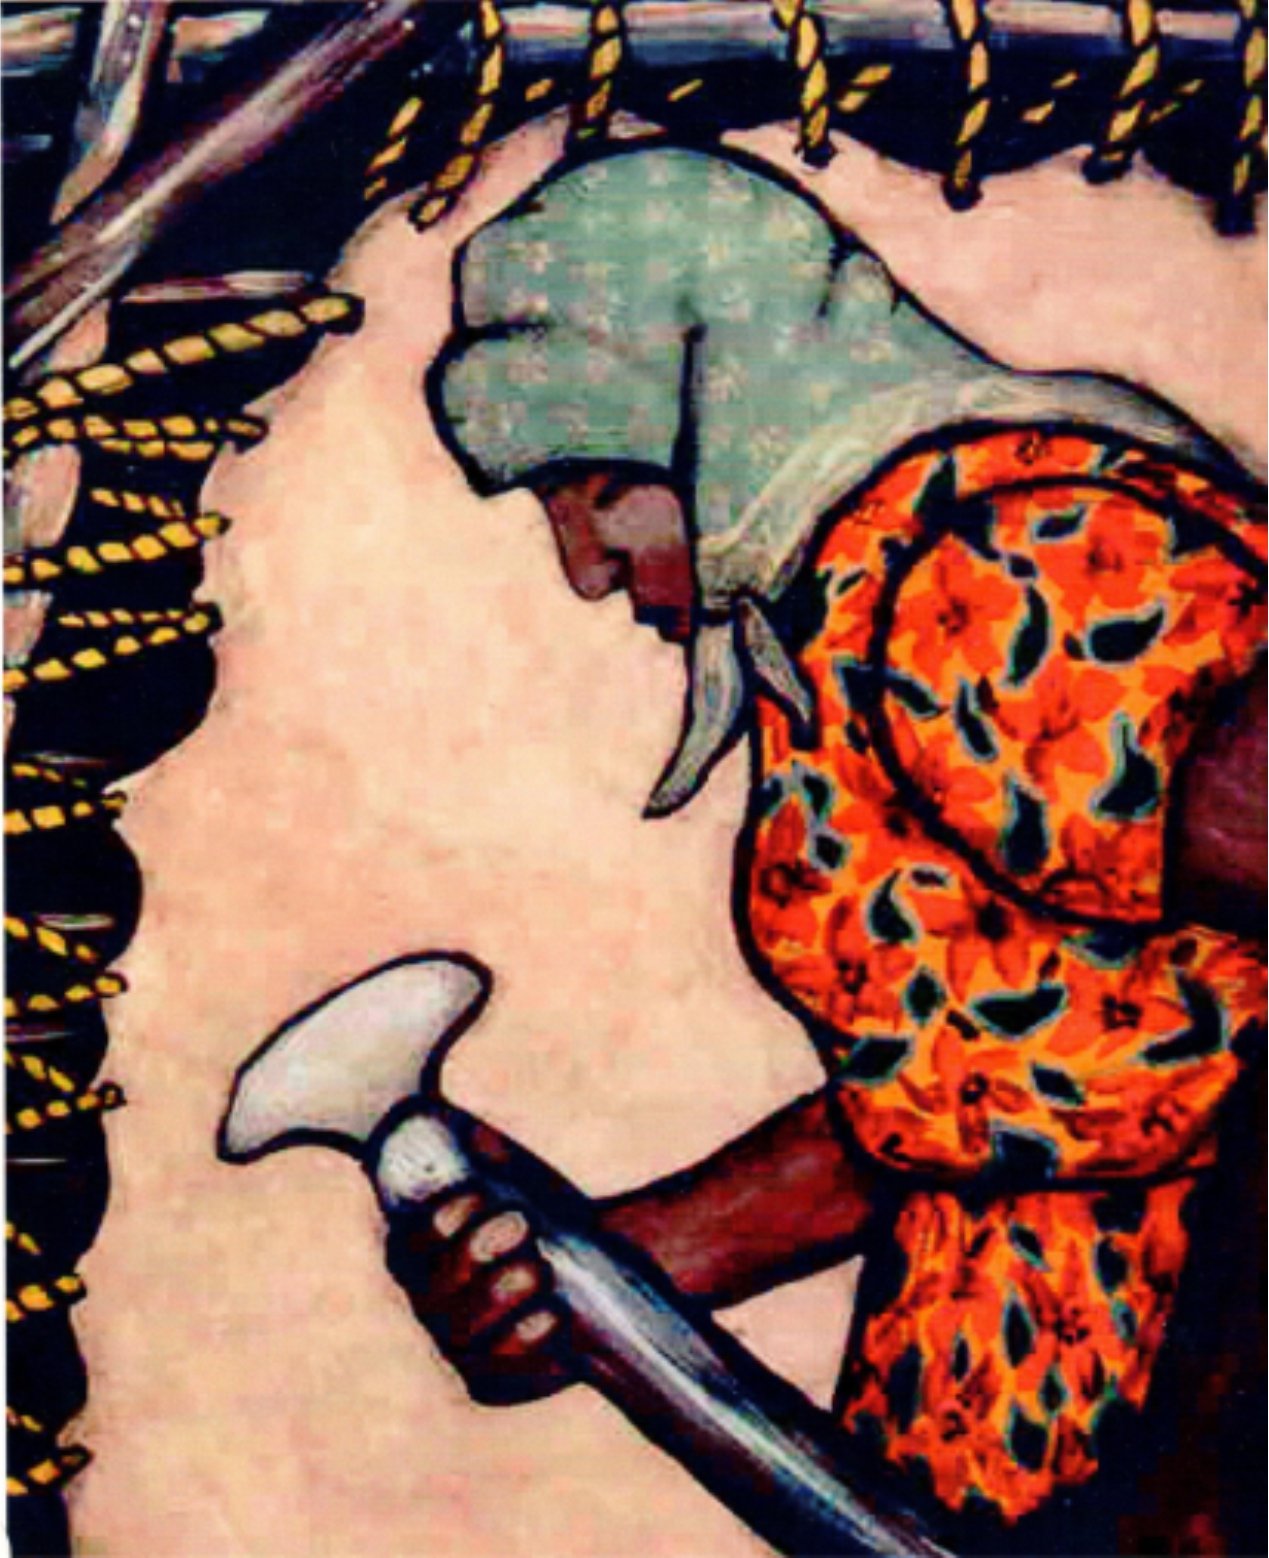 A painting by Nokomis showing her grandmother scraping a hide.